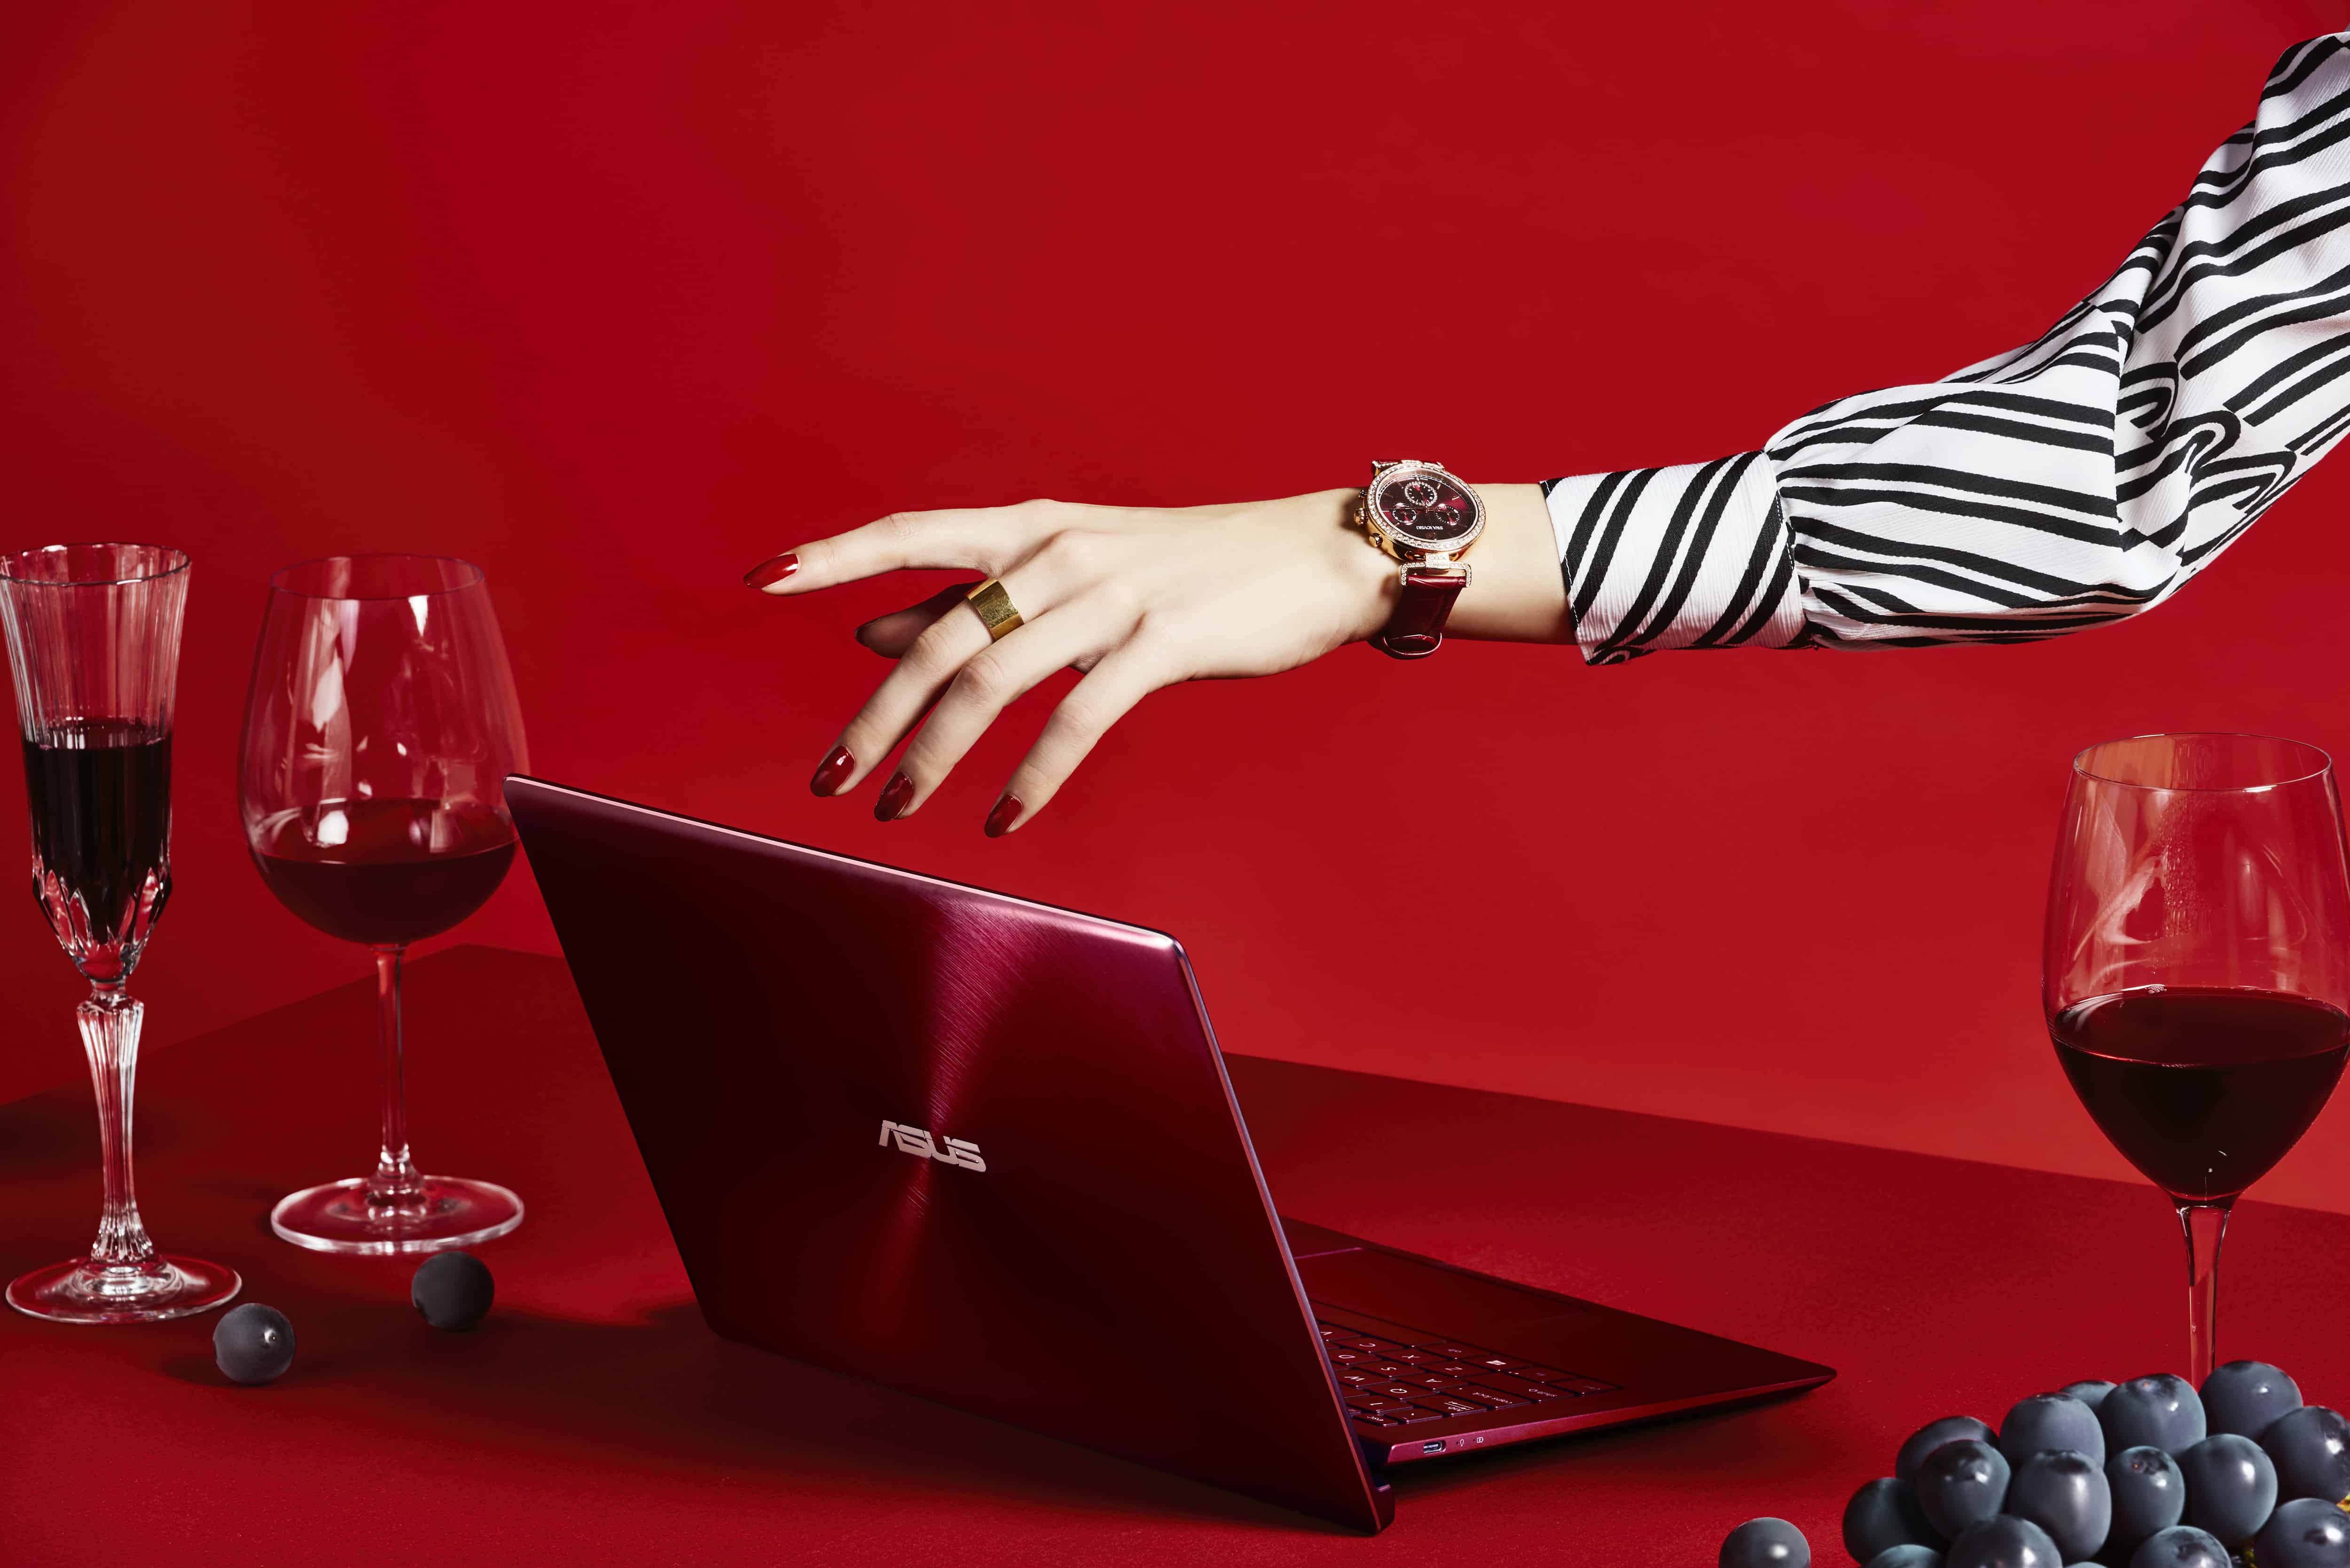 Harga Asus Zenbook S Burgundy Red Limited Edition